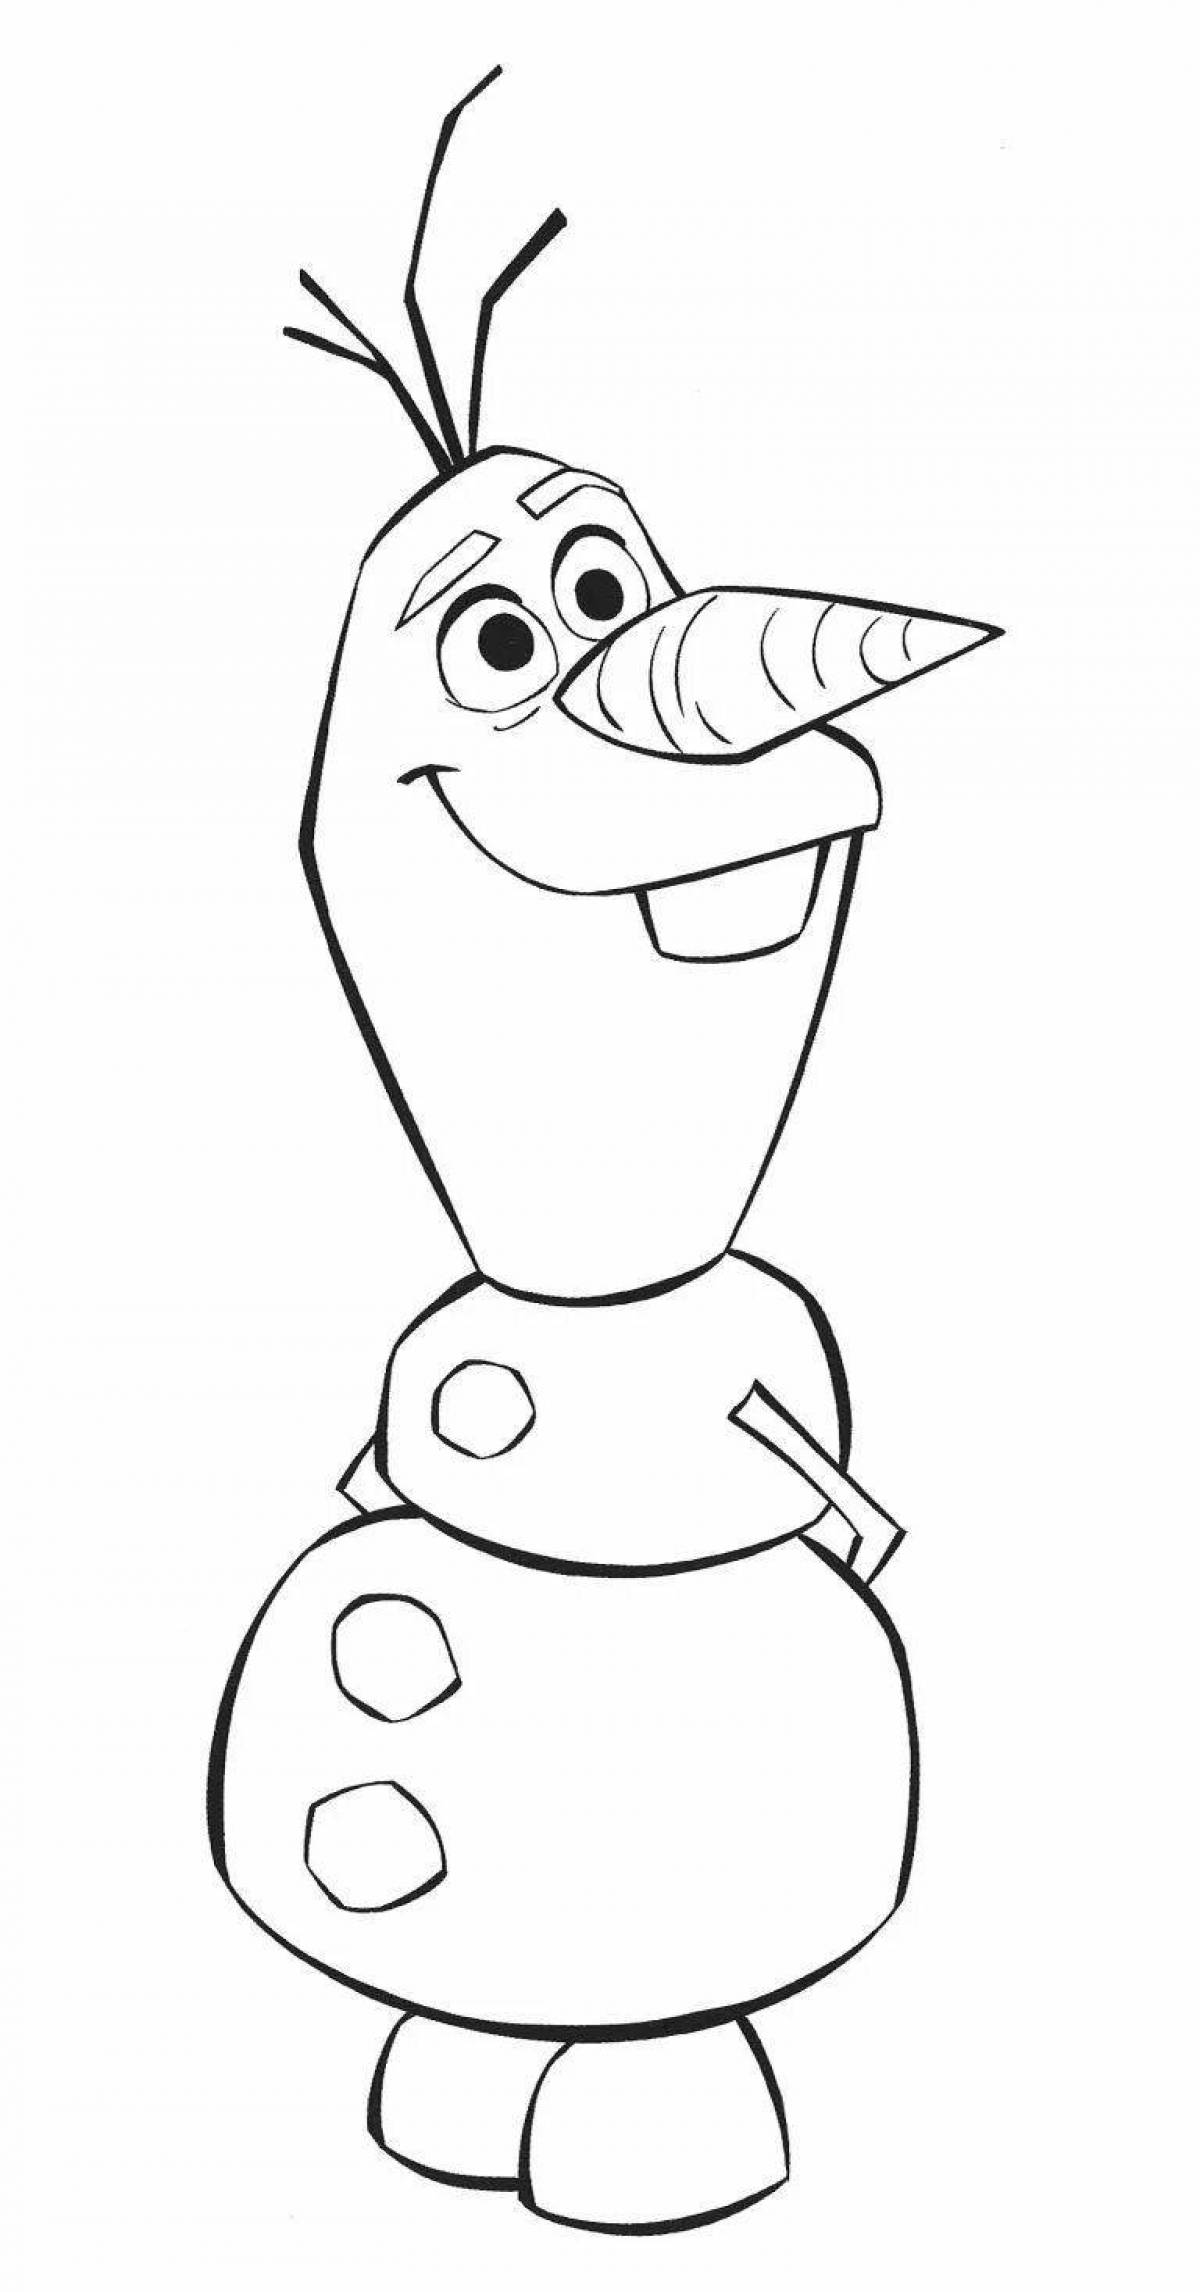 Olaf's Frozen coloring page